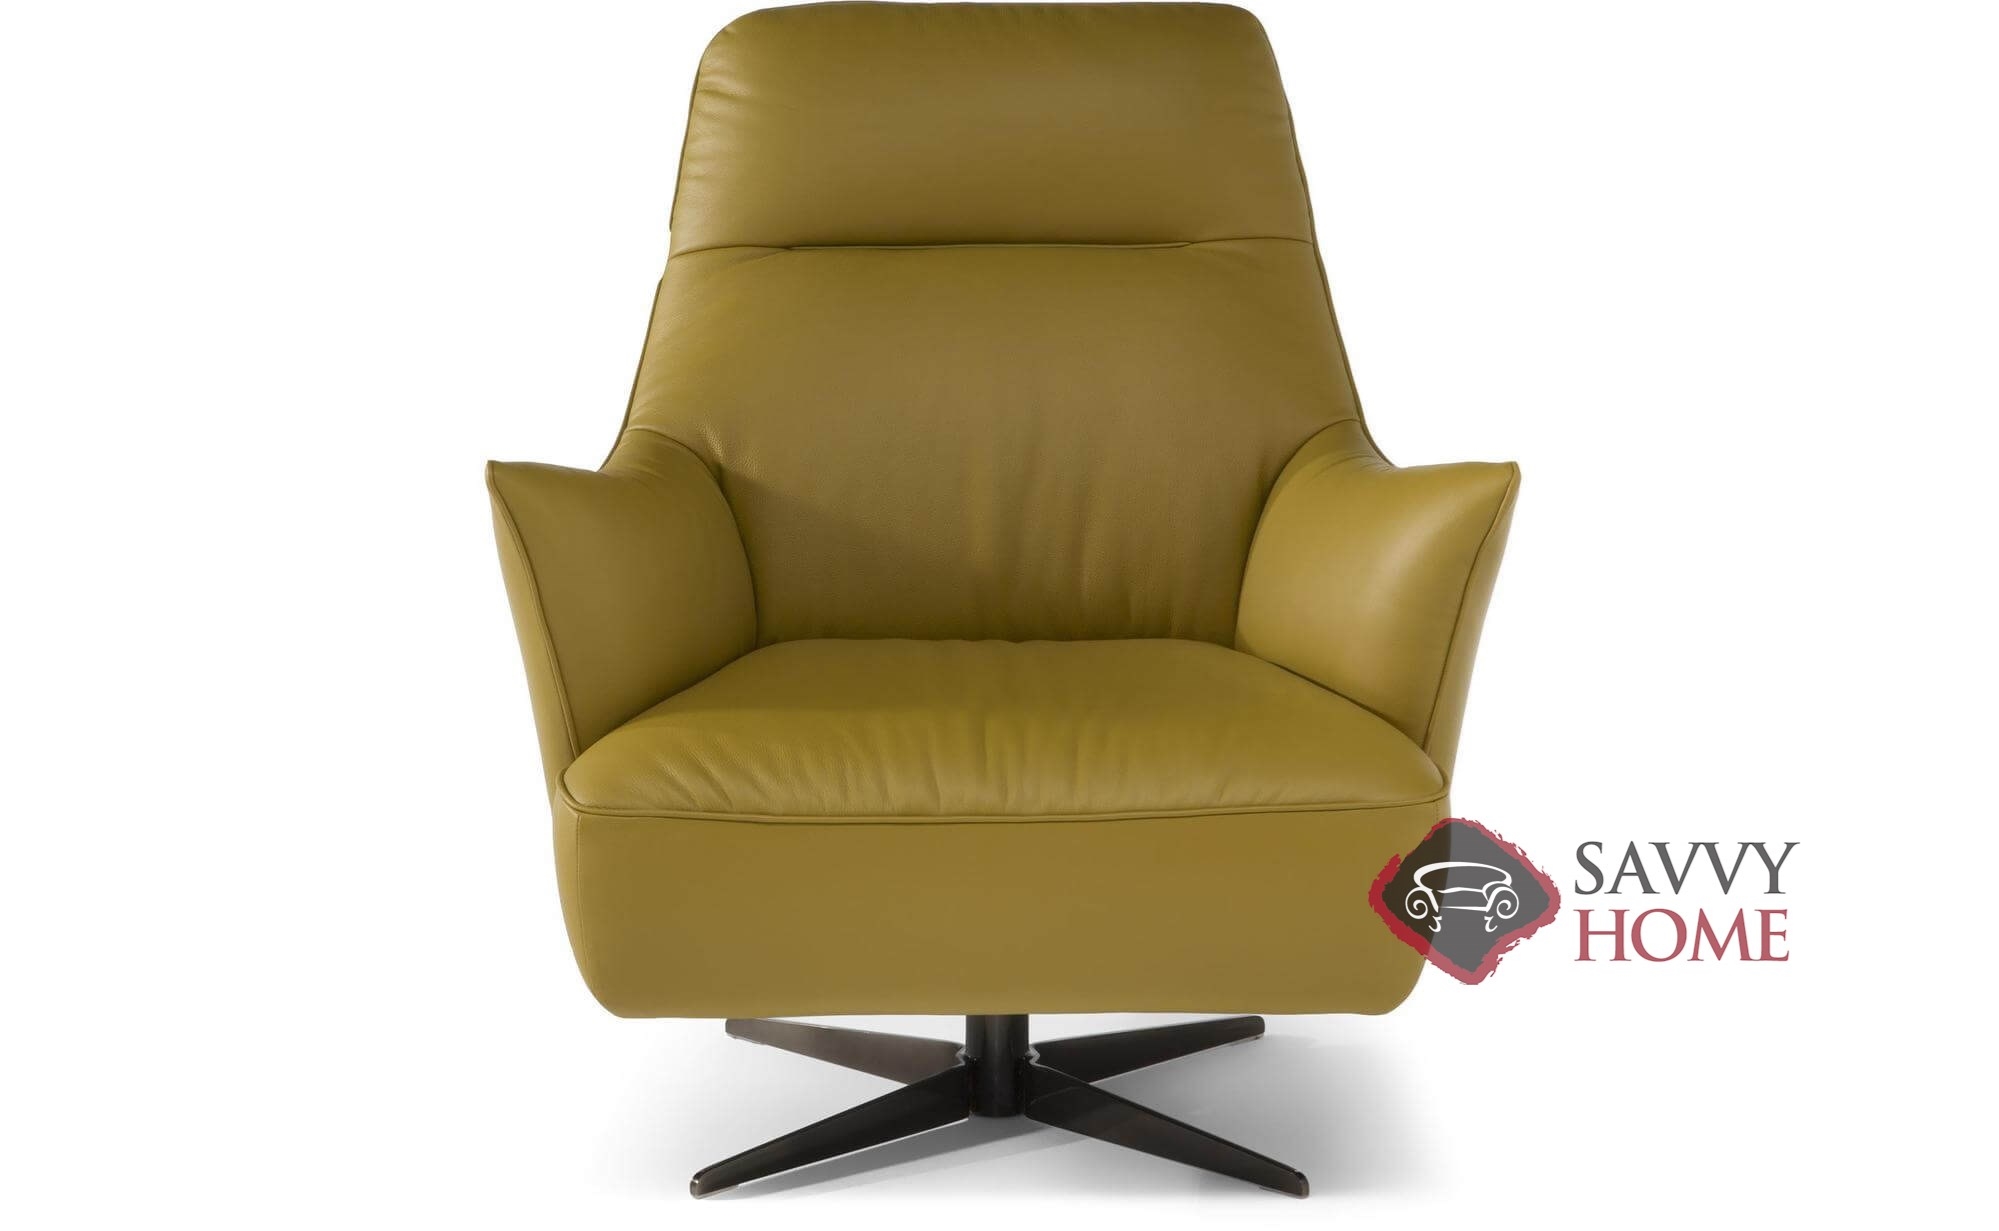 Calma C056 Leather Stationary Chair, Natuzzi Red Leather Swivel Chair